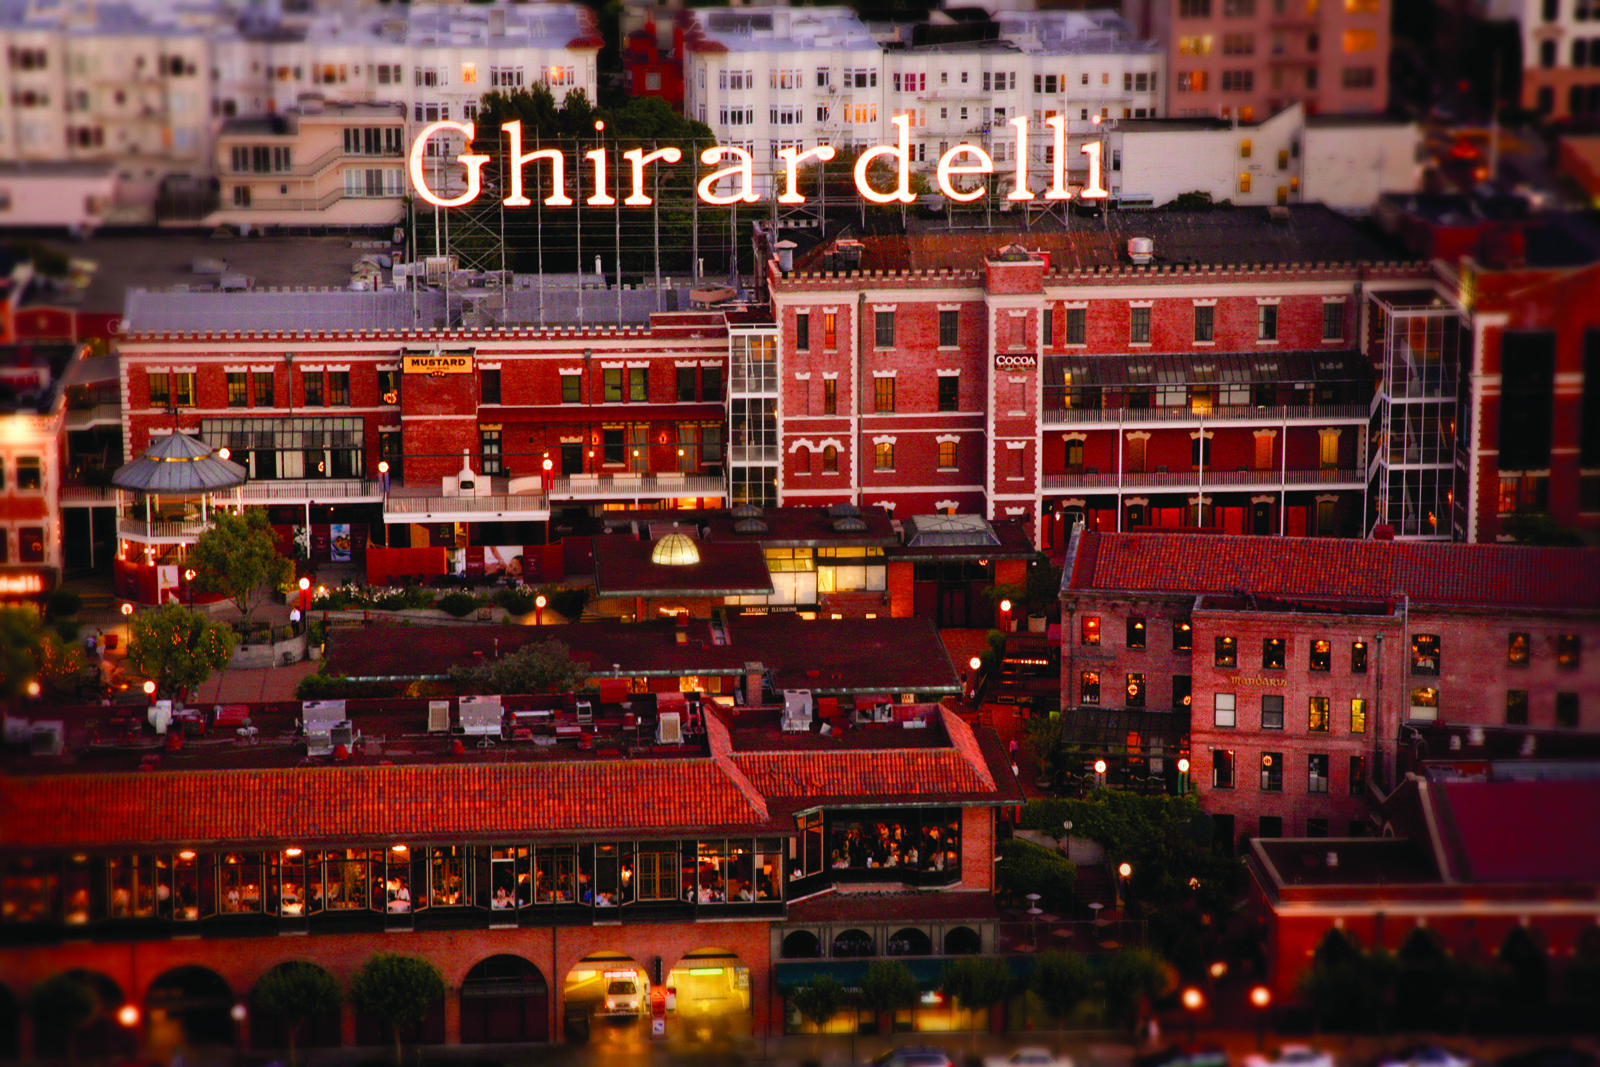 Ghirardelli’s chocolate factory. offering one, two and three bedroom luxury...